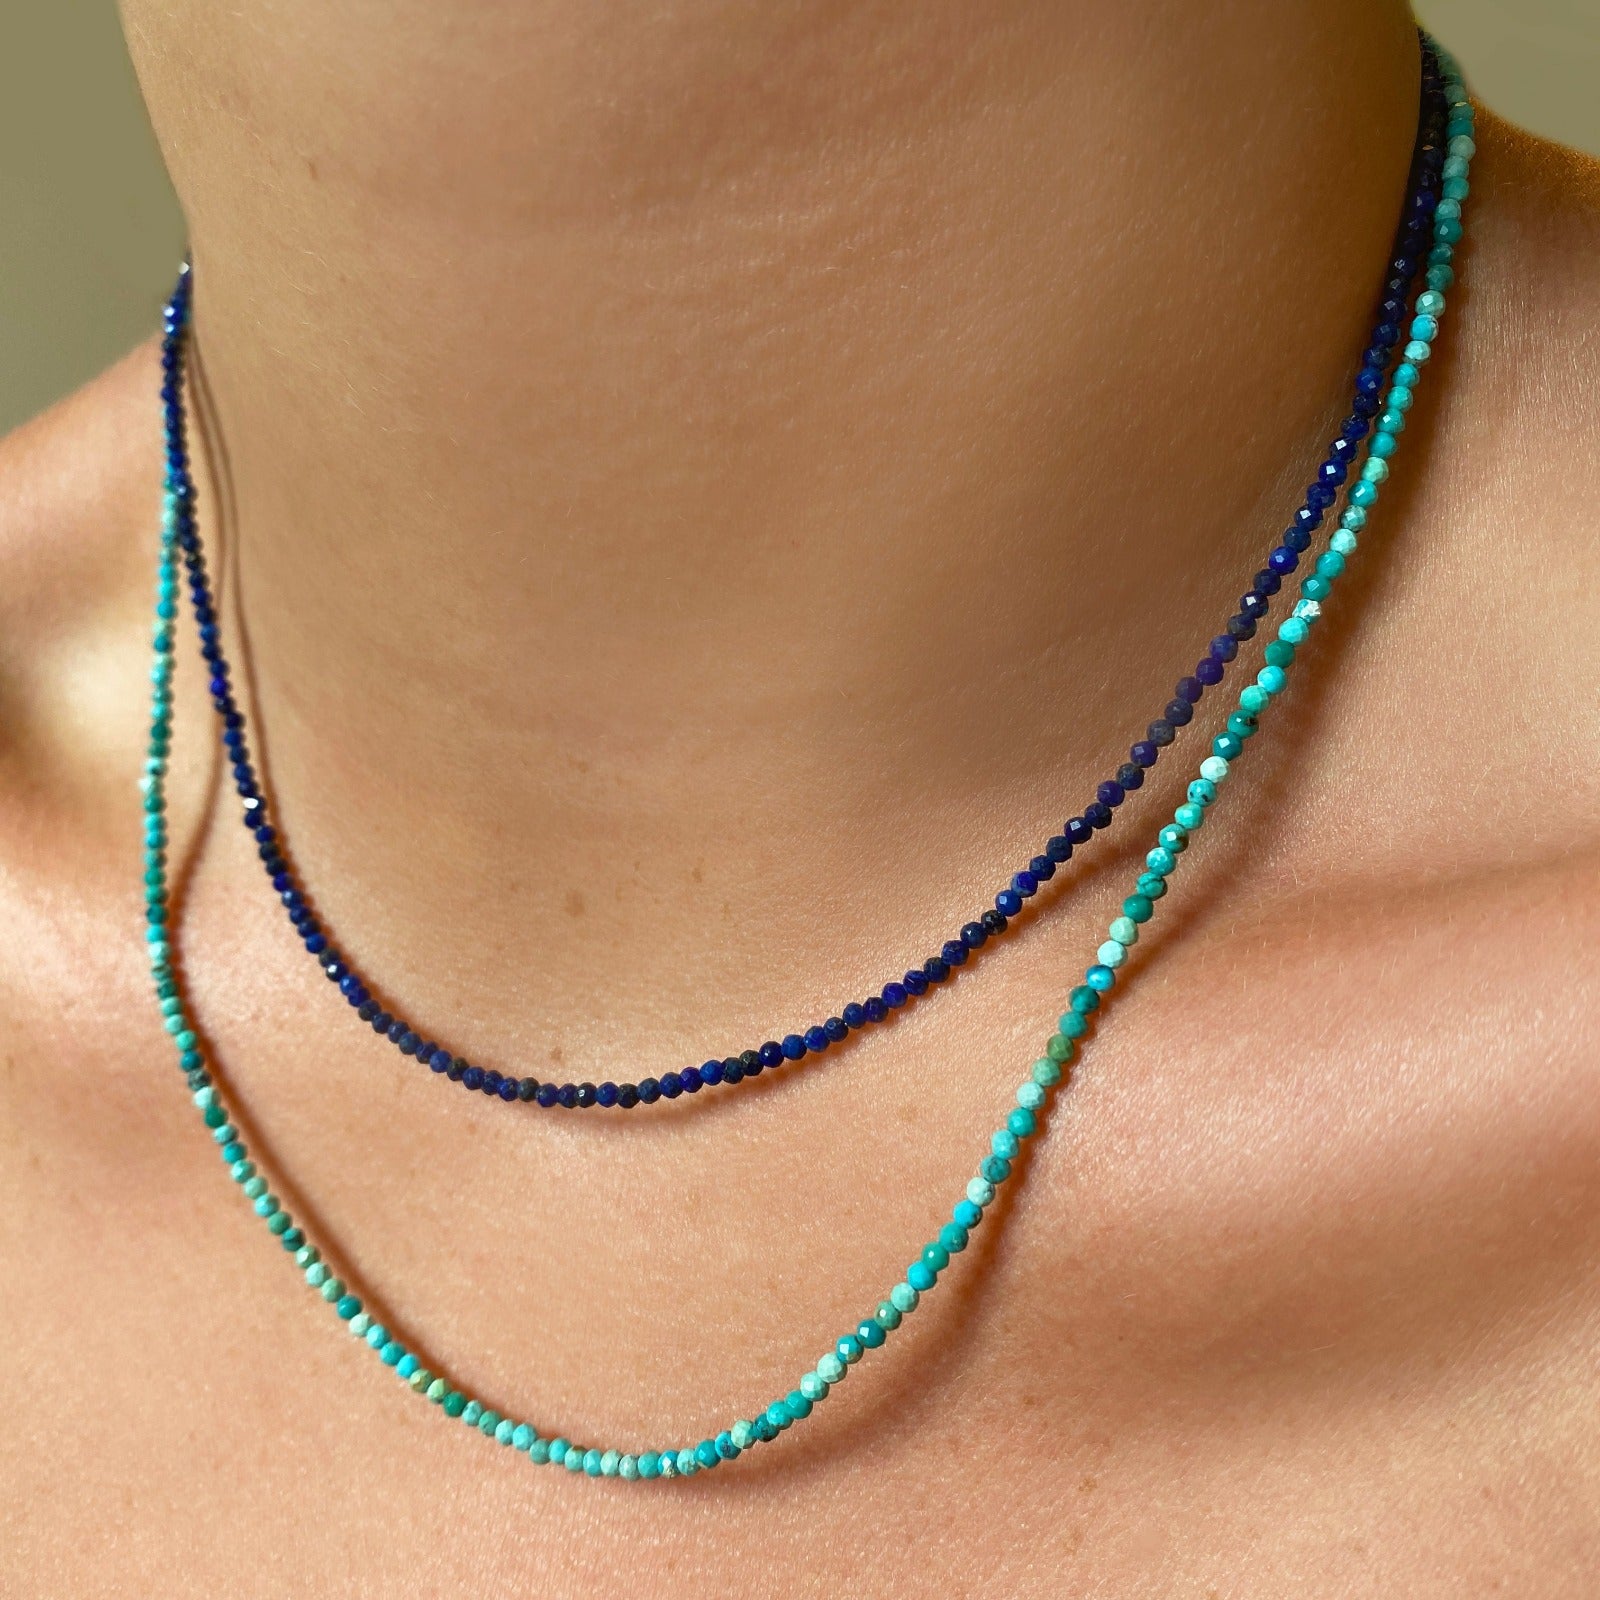 Two shimmering beaded necklaces made of 2mm faceted opals in shades of blue and turquoise on a gold linking lobster clasp.